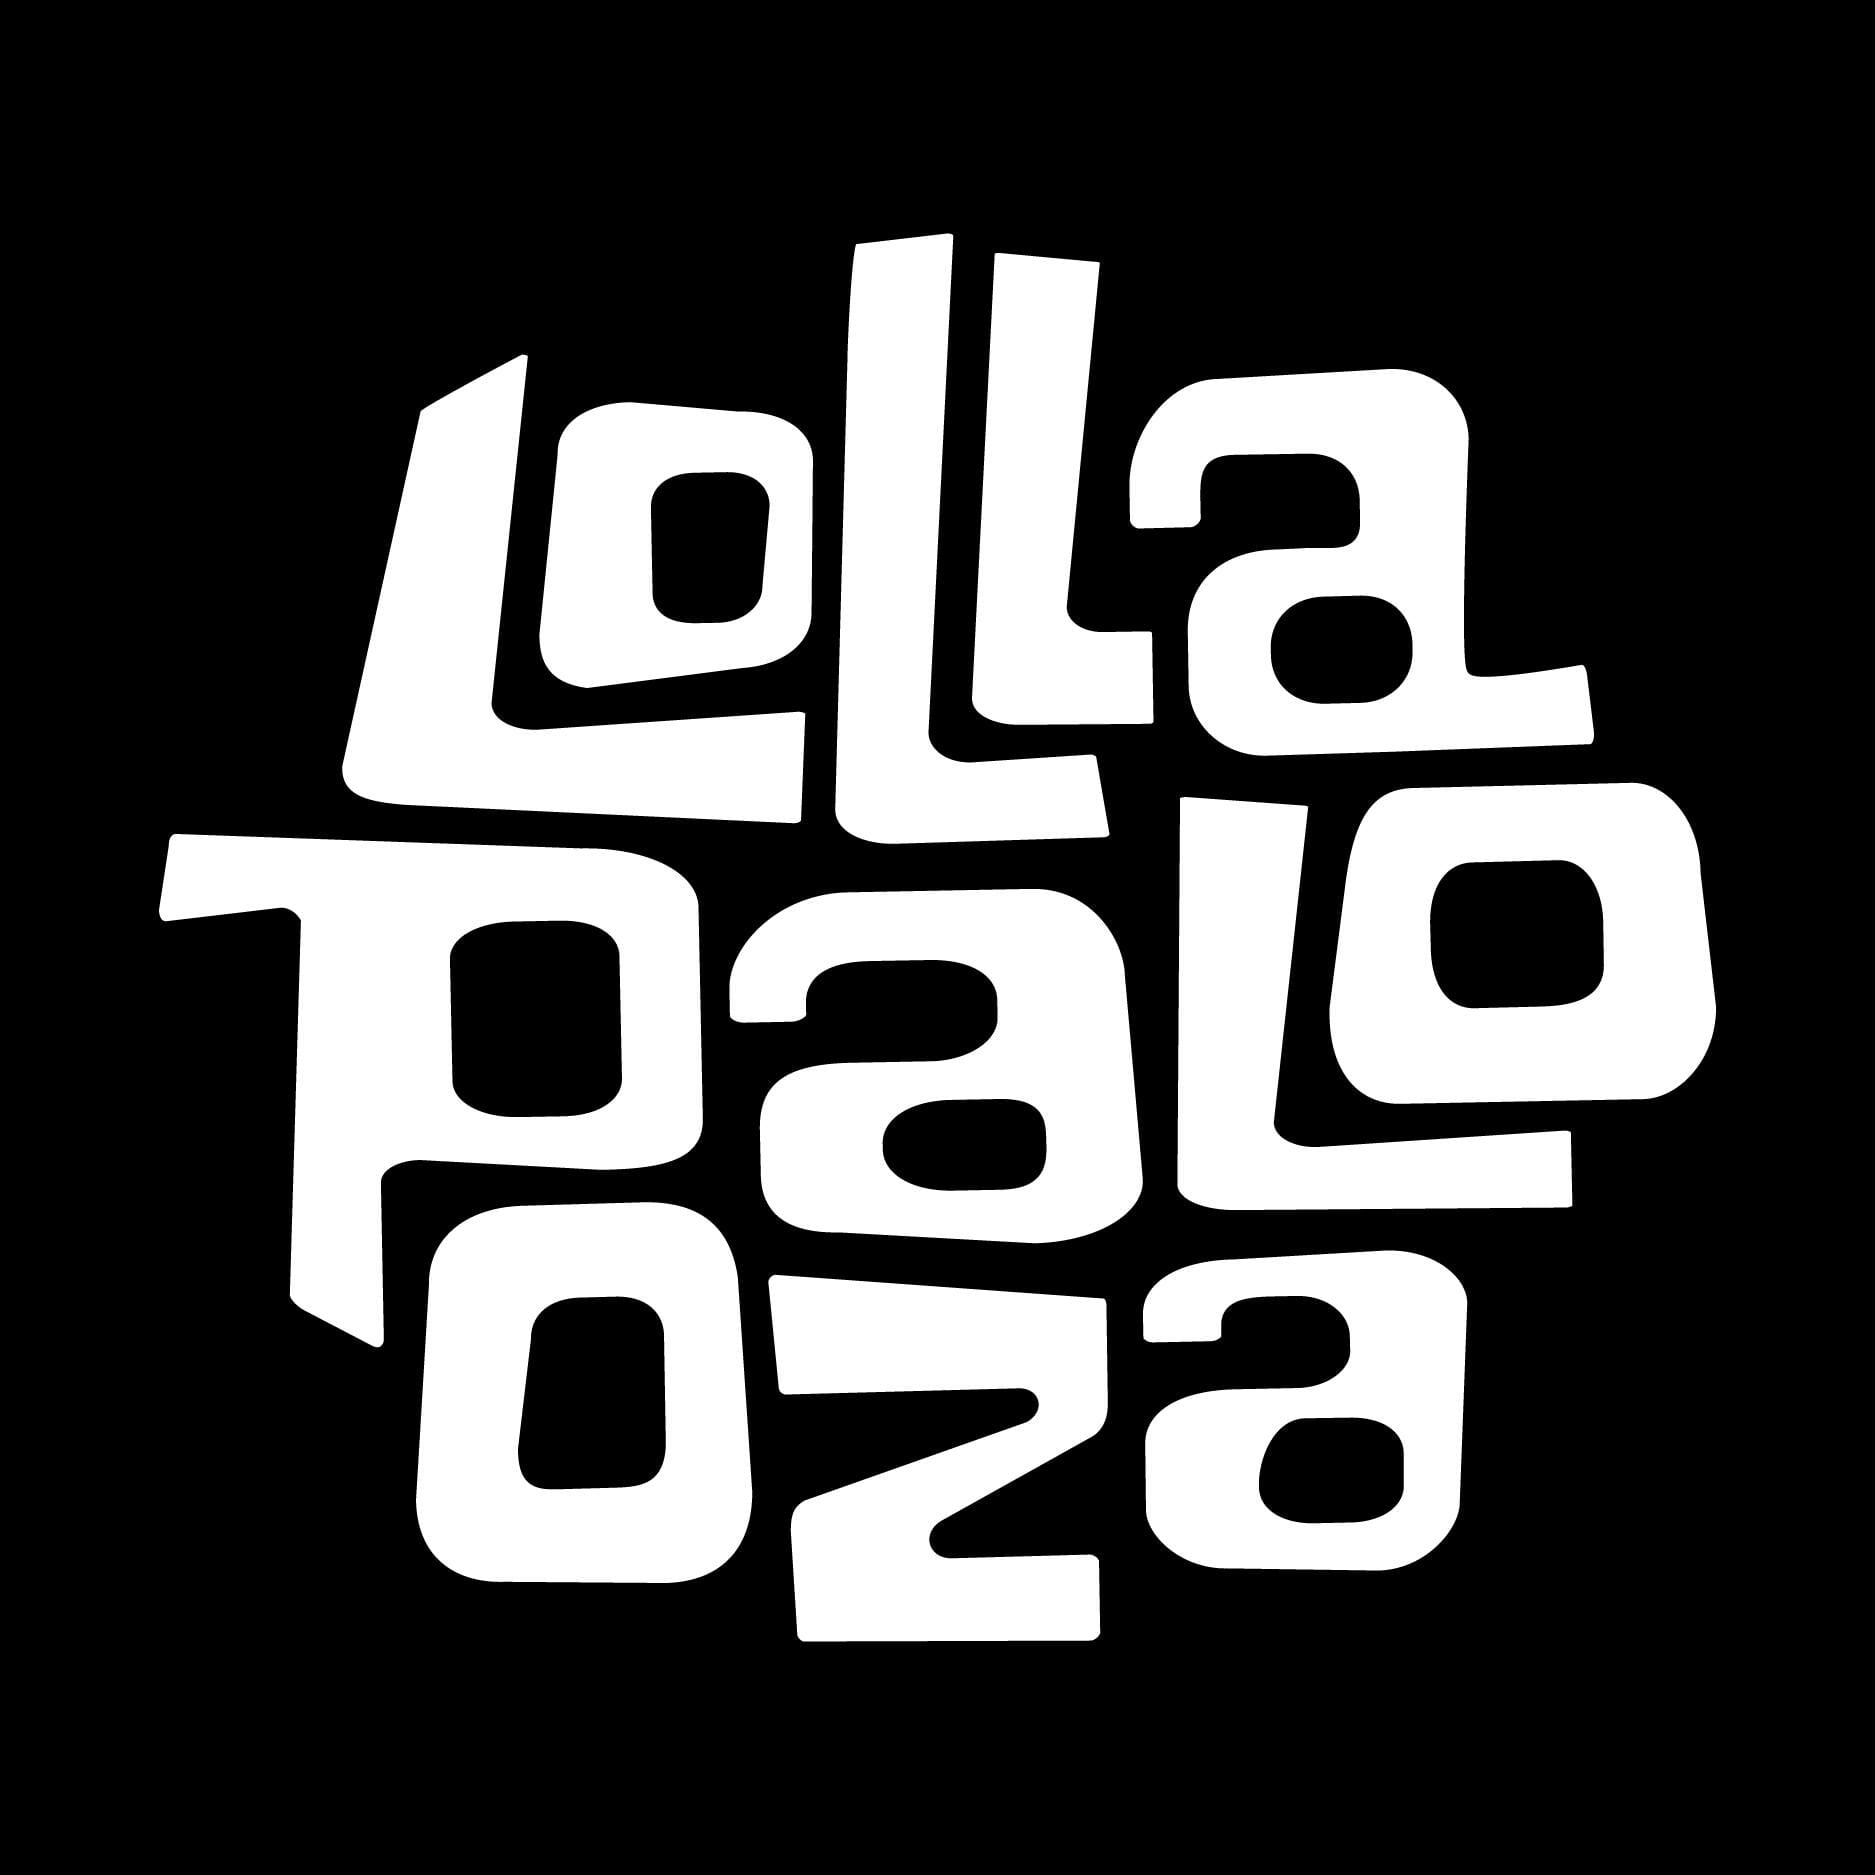 23 Artists to See at Lollapalooza 2023